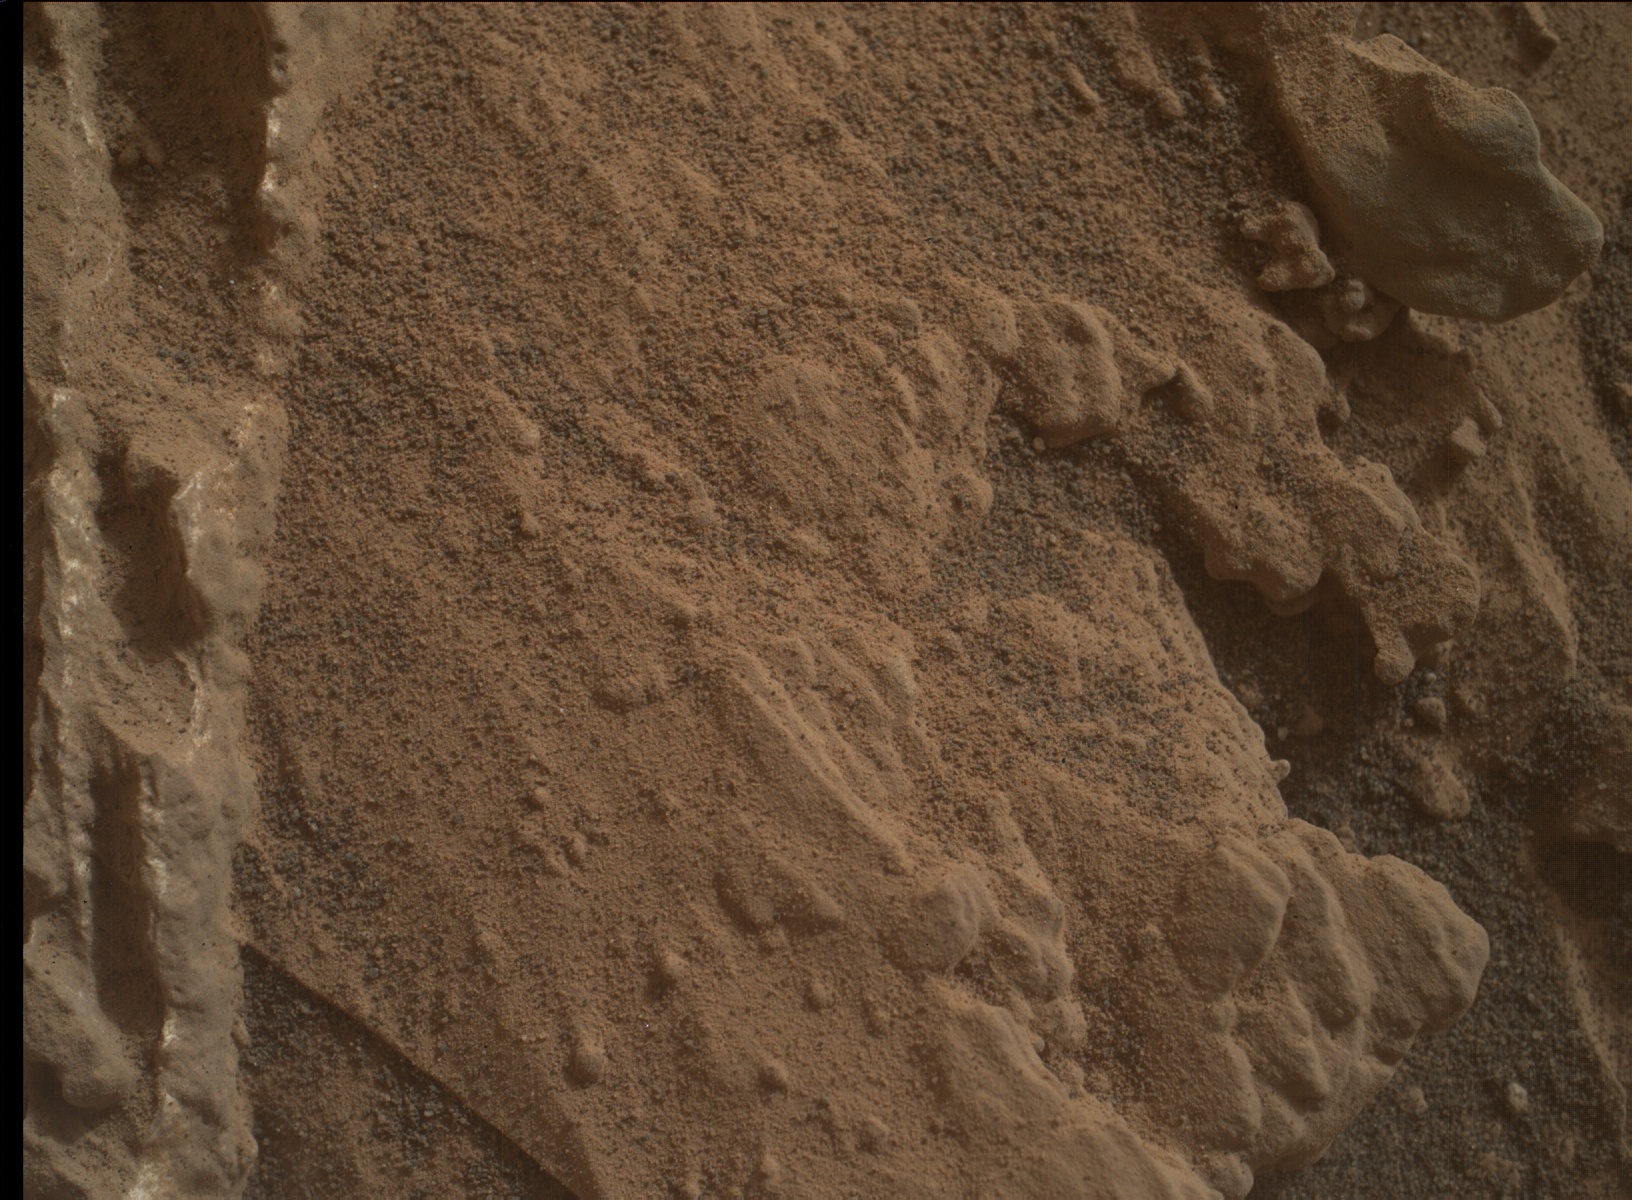 Nasa's Mars rover Curiosity acquired this image using its Mars Hand Lens Imager (MAHLI) on Sol 3503